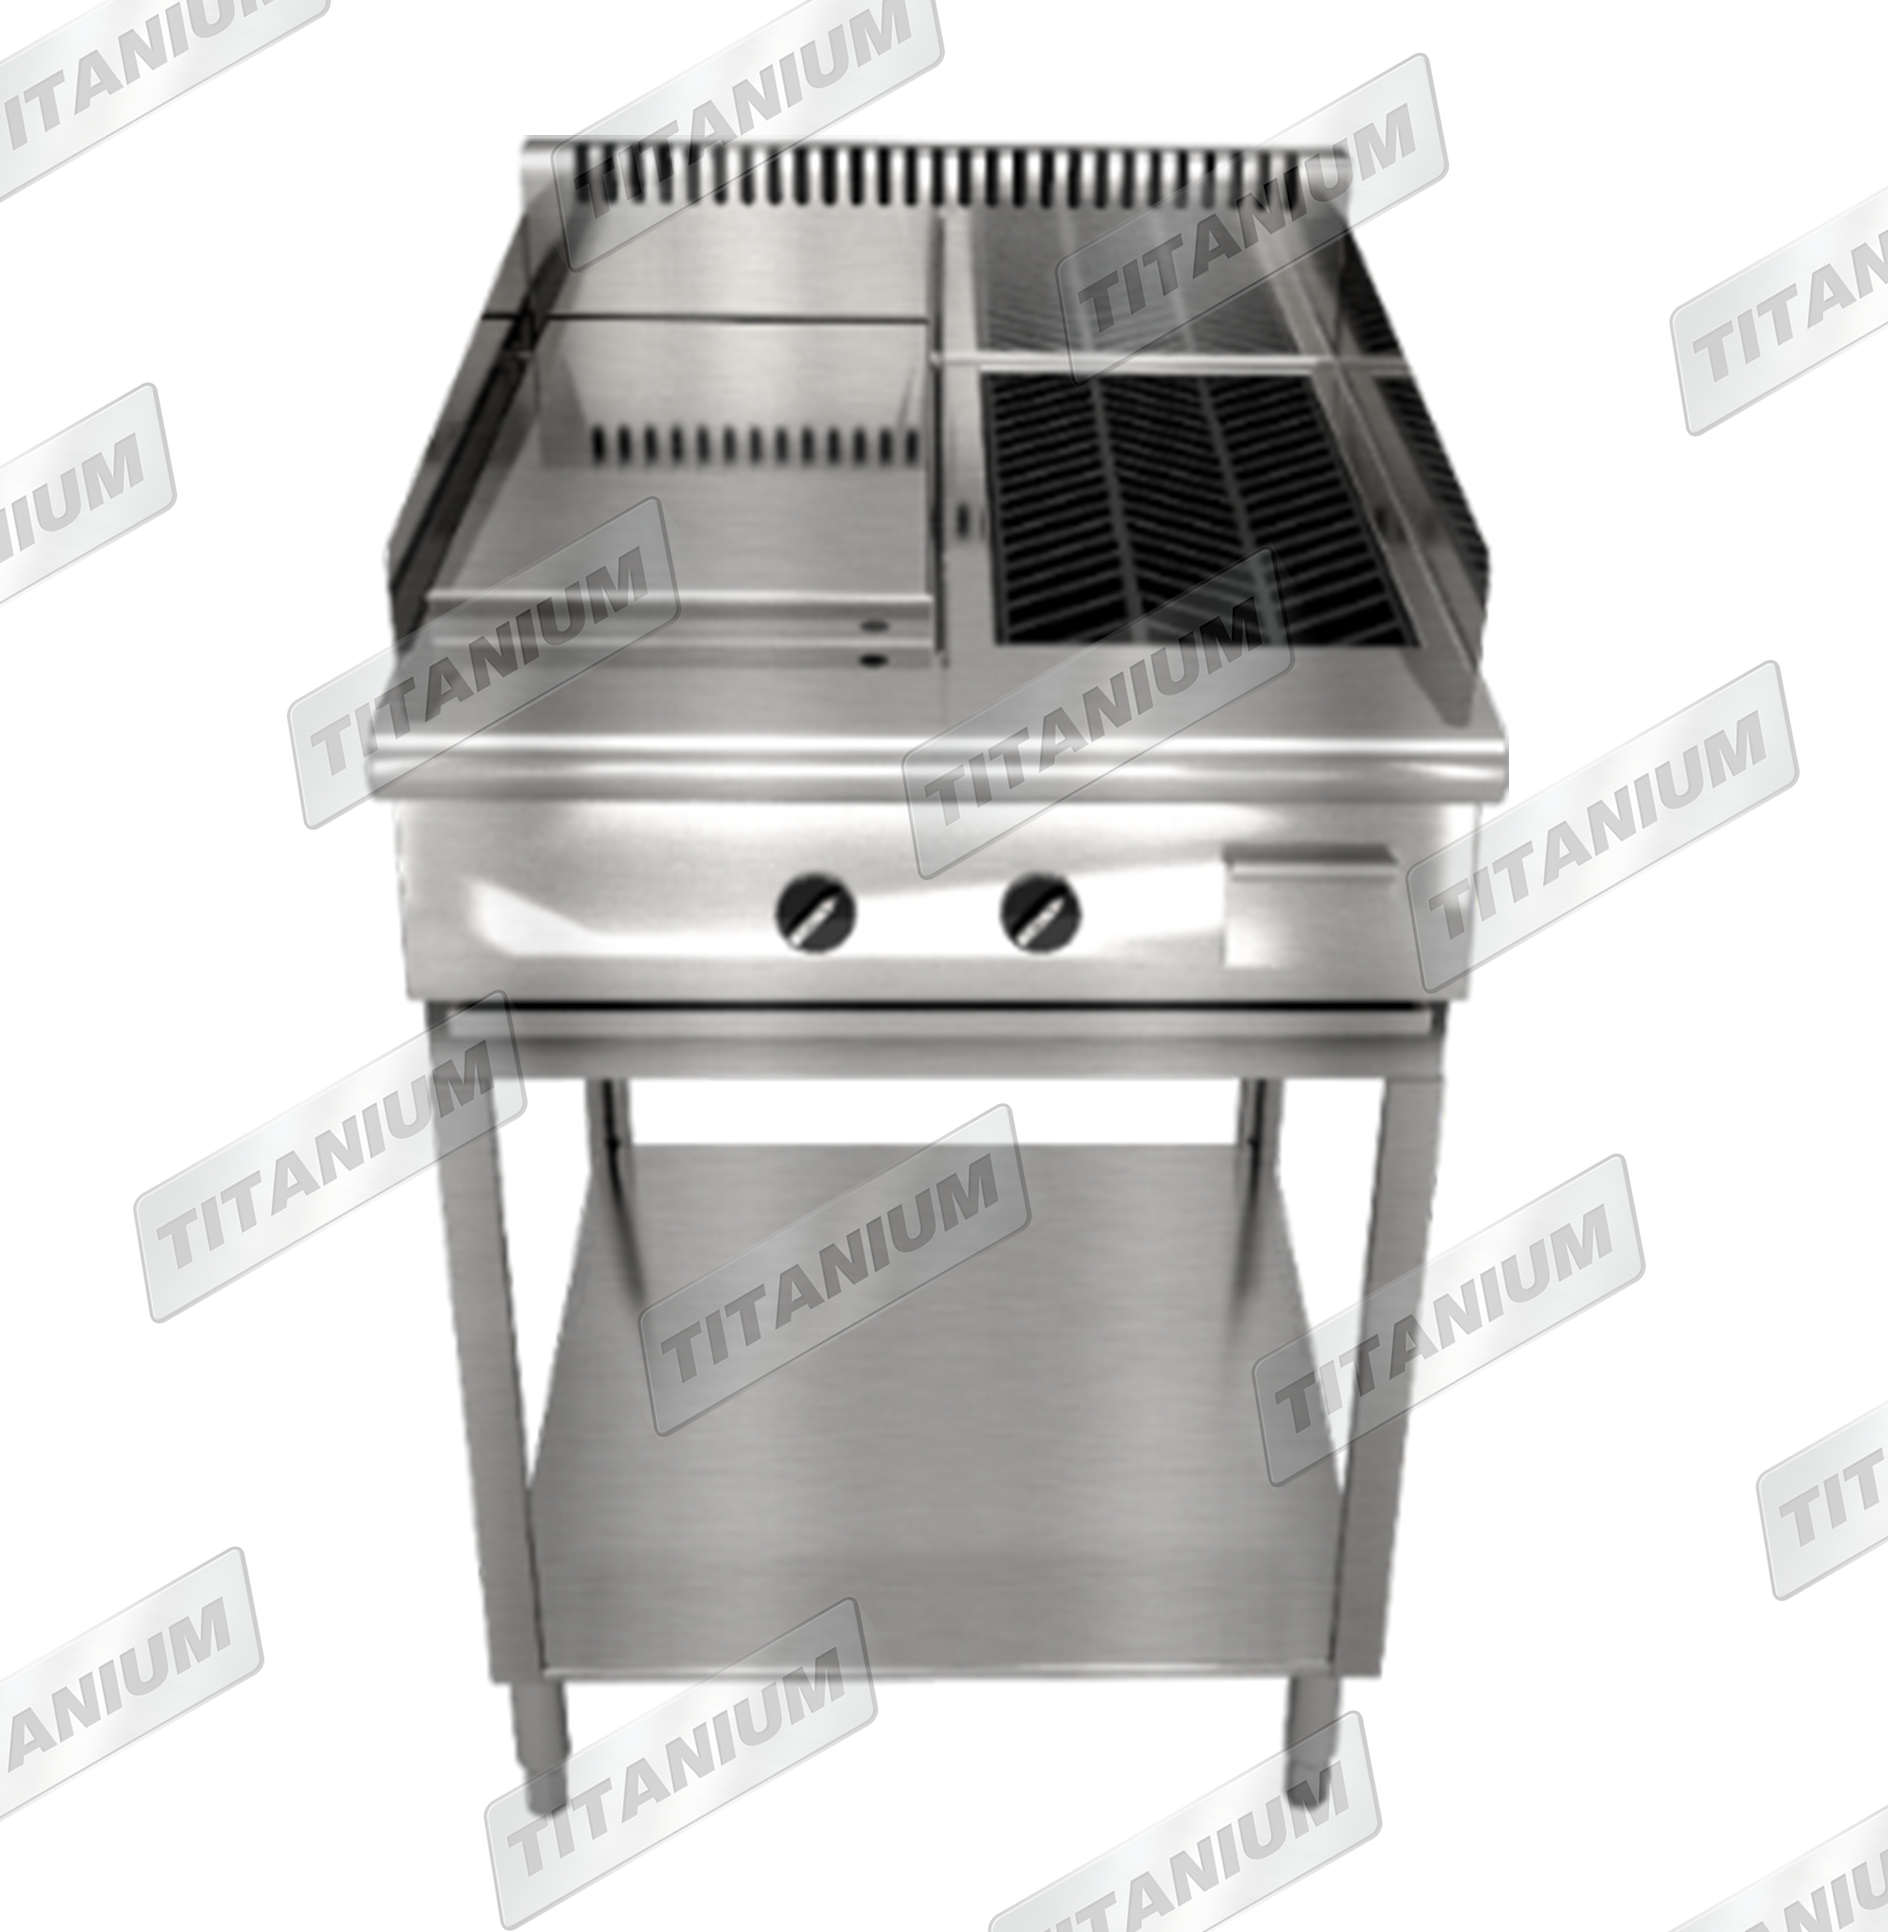 COMBINATION GRIDDLEMINUSCHARCOAL BROILER WITH STAND